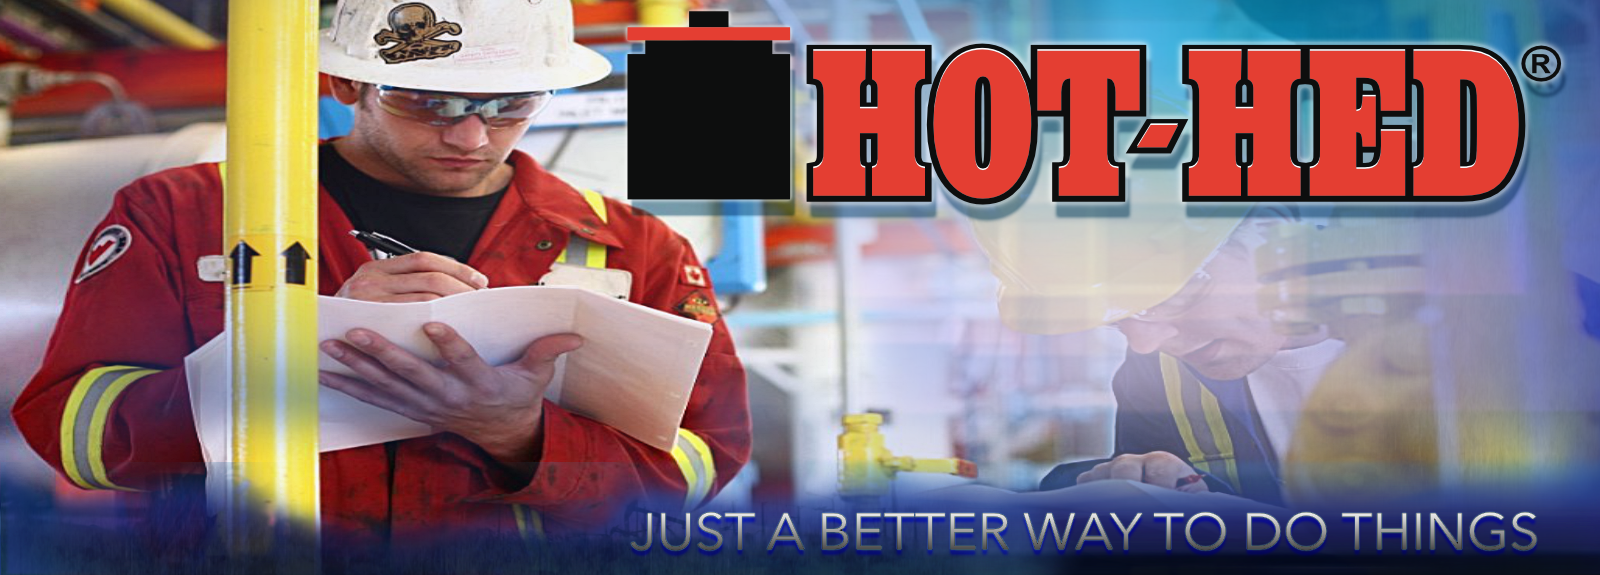 Hot-Hed® International's HSE - Health, Safety & Environment Policy